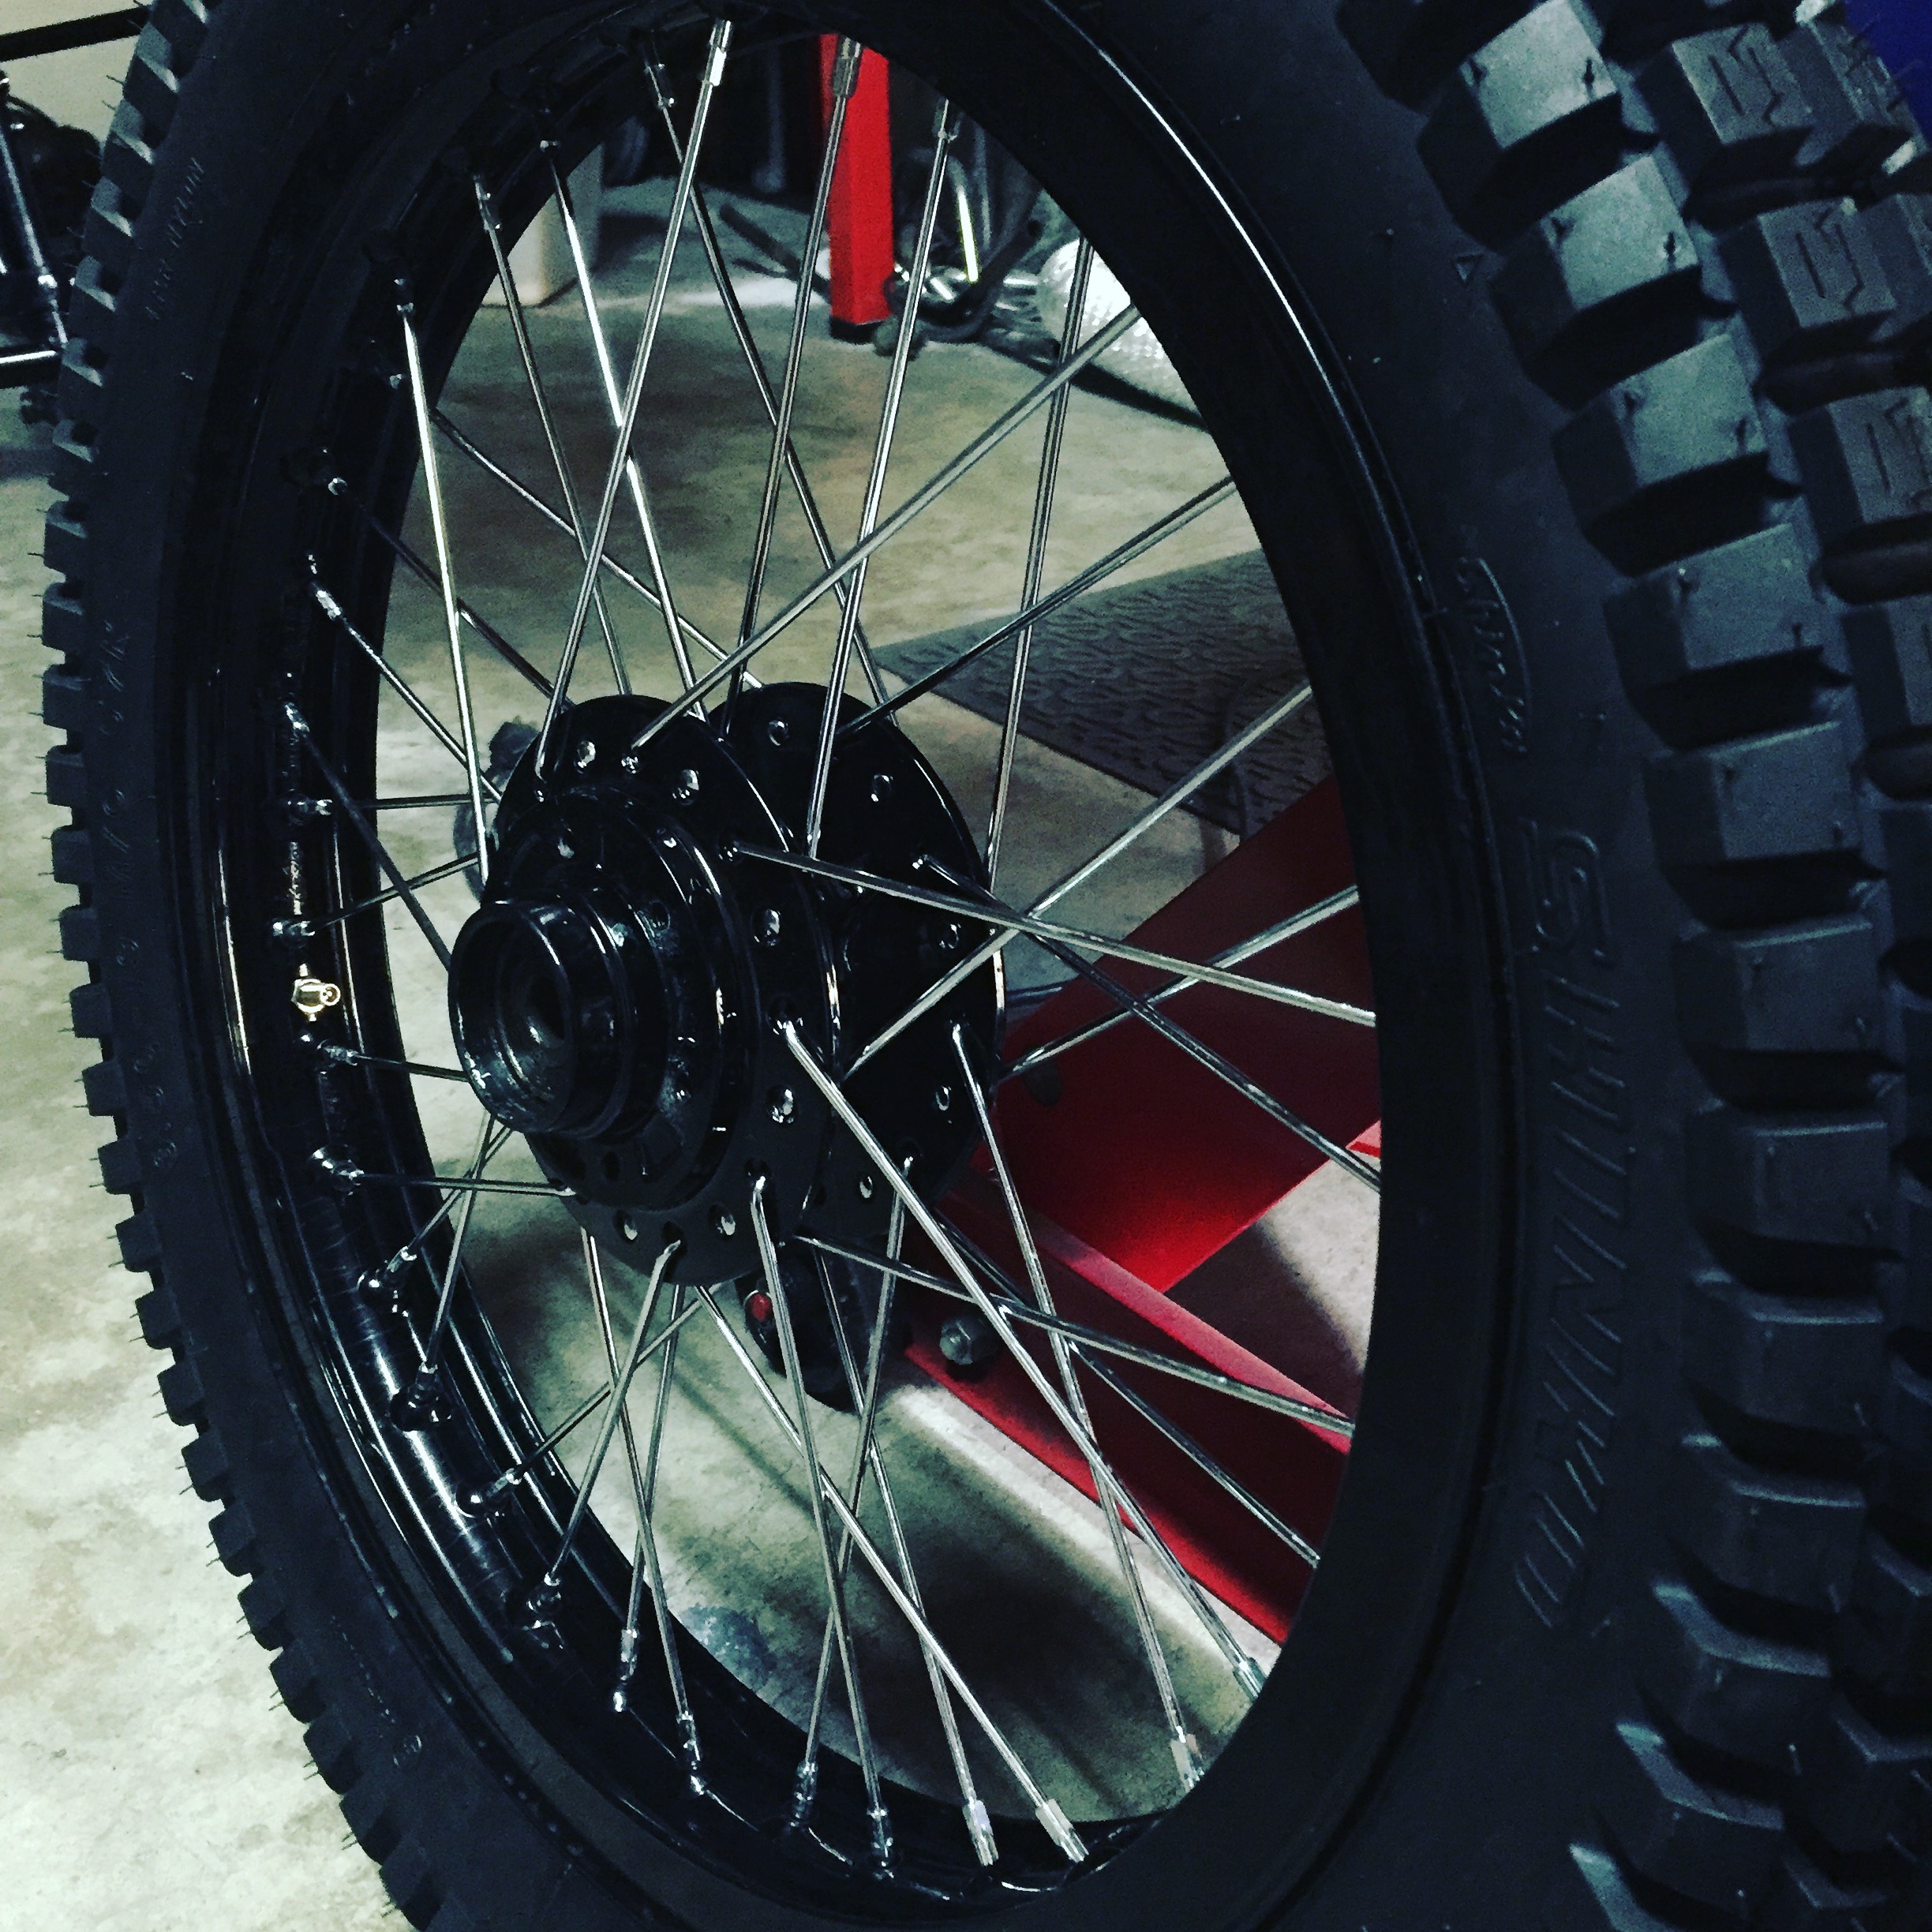  Our "go to" combination. &nbsp;Gloss black powder coated wheels and hubs with chrome spokes. &nbsp;We've done it before, and we'll surely do it again. &nbsp;This XS650 is going to look killer with   trials tires  ! 